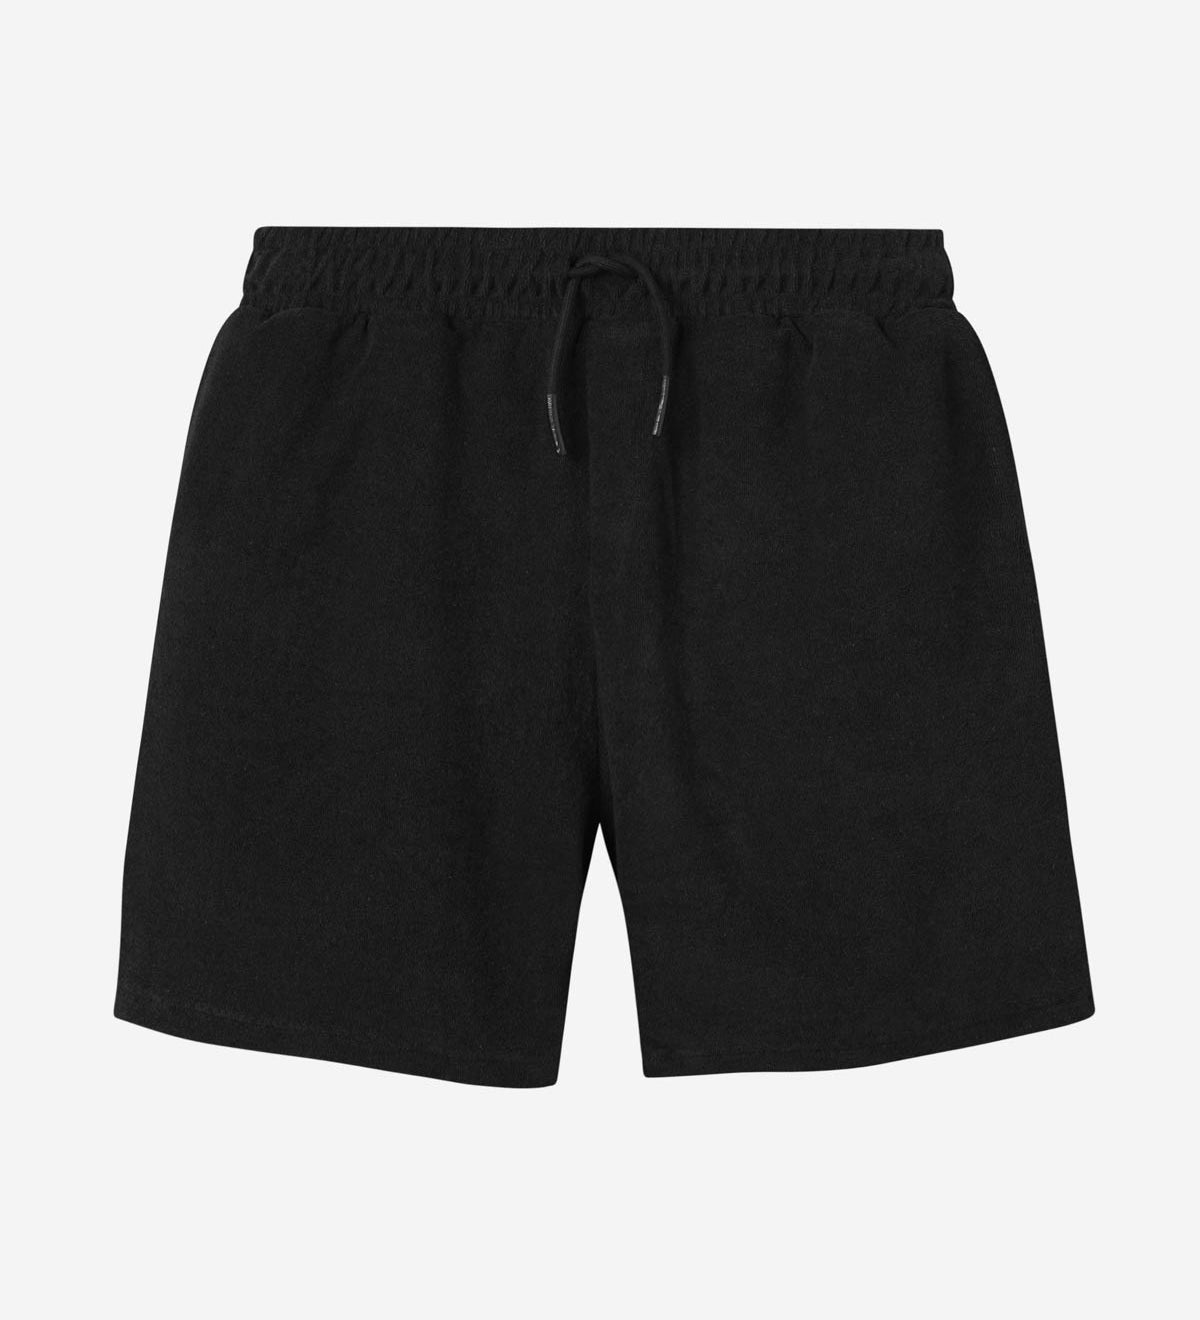 Black mid length shorts in terry toweling fabric with drawdtring and two side pockets.